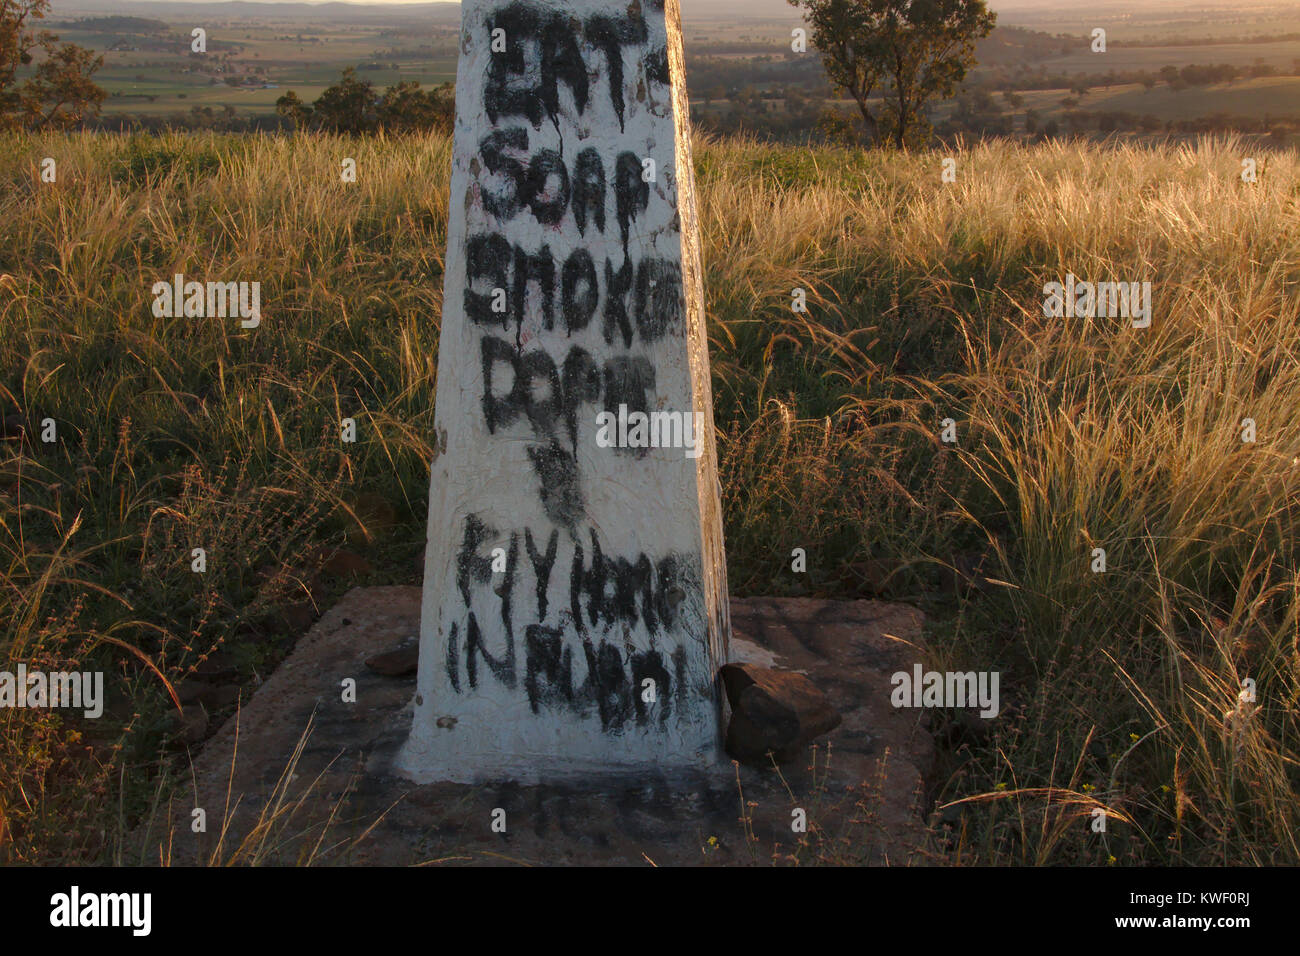 Eat soap smoke dope and fly home in a bubble - Graffiti on Trig point on  Bald Hill NSW Stock Photo - Alamy